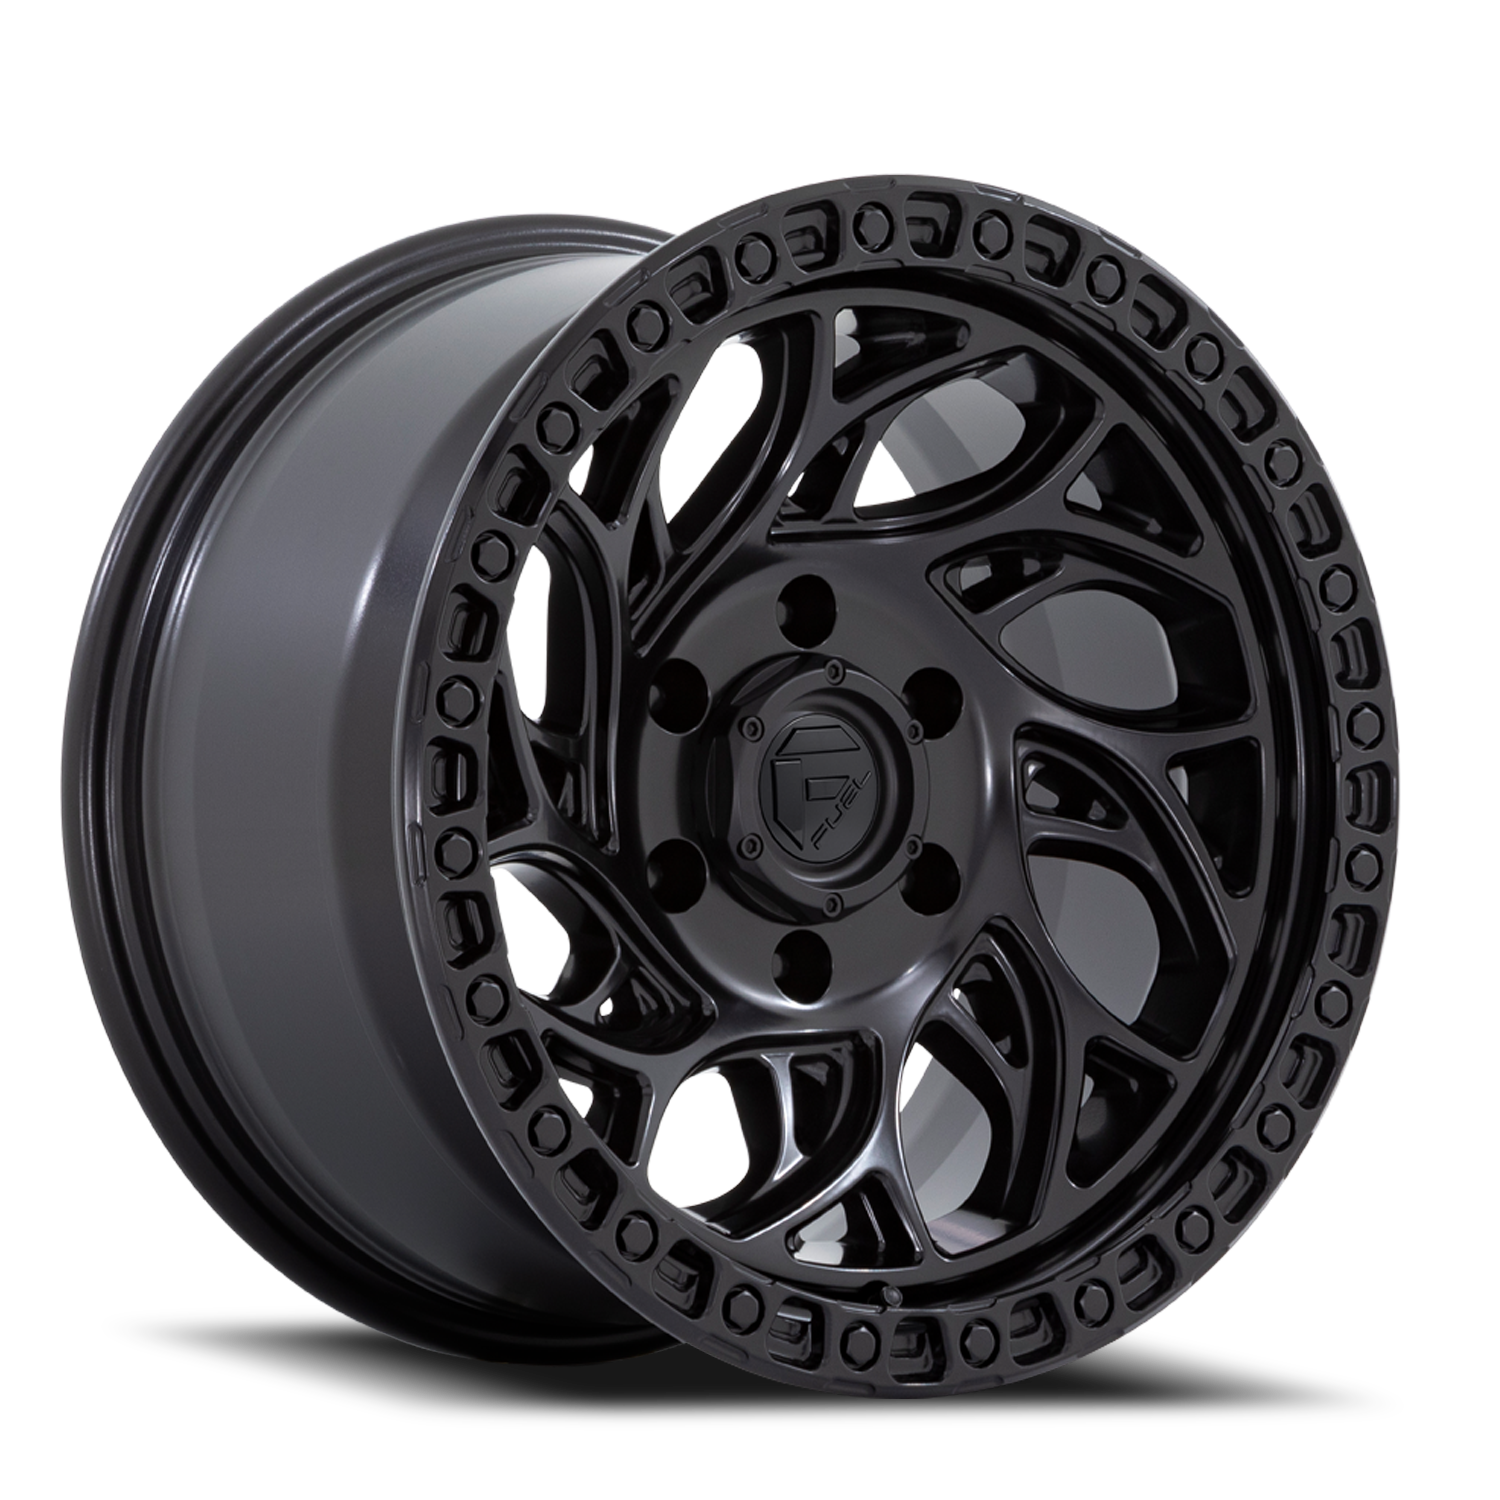 Aluminum Wheels 20X9 Runner OR D852 6 On 114.3 Blackout 66.06 Bore 1 Offset Fuel Off Road Wheels